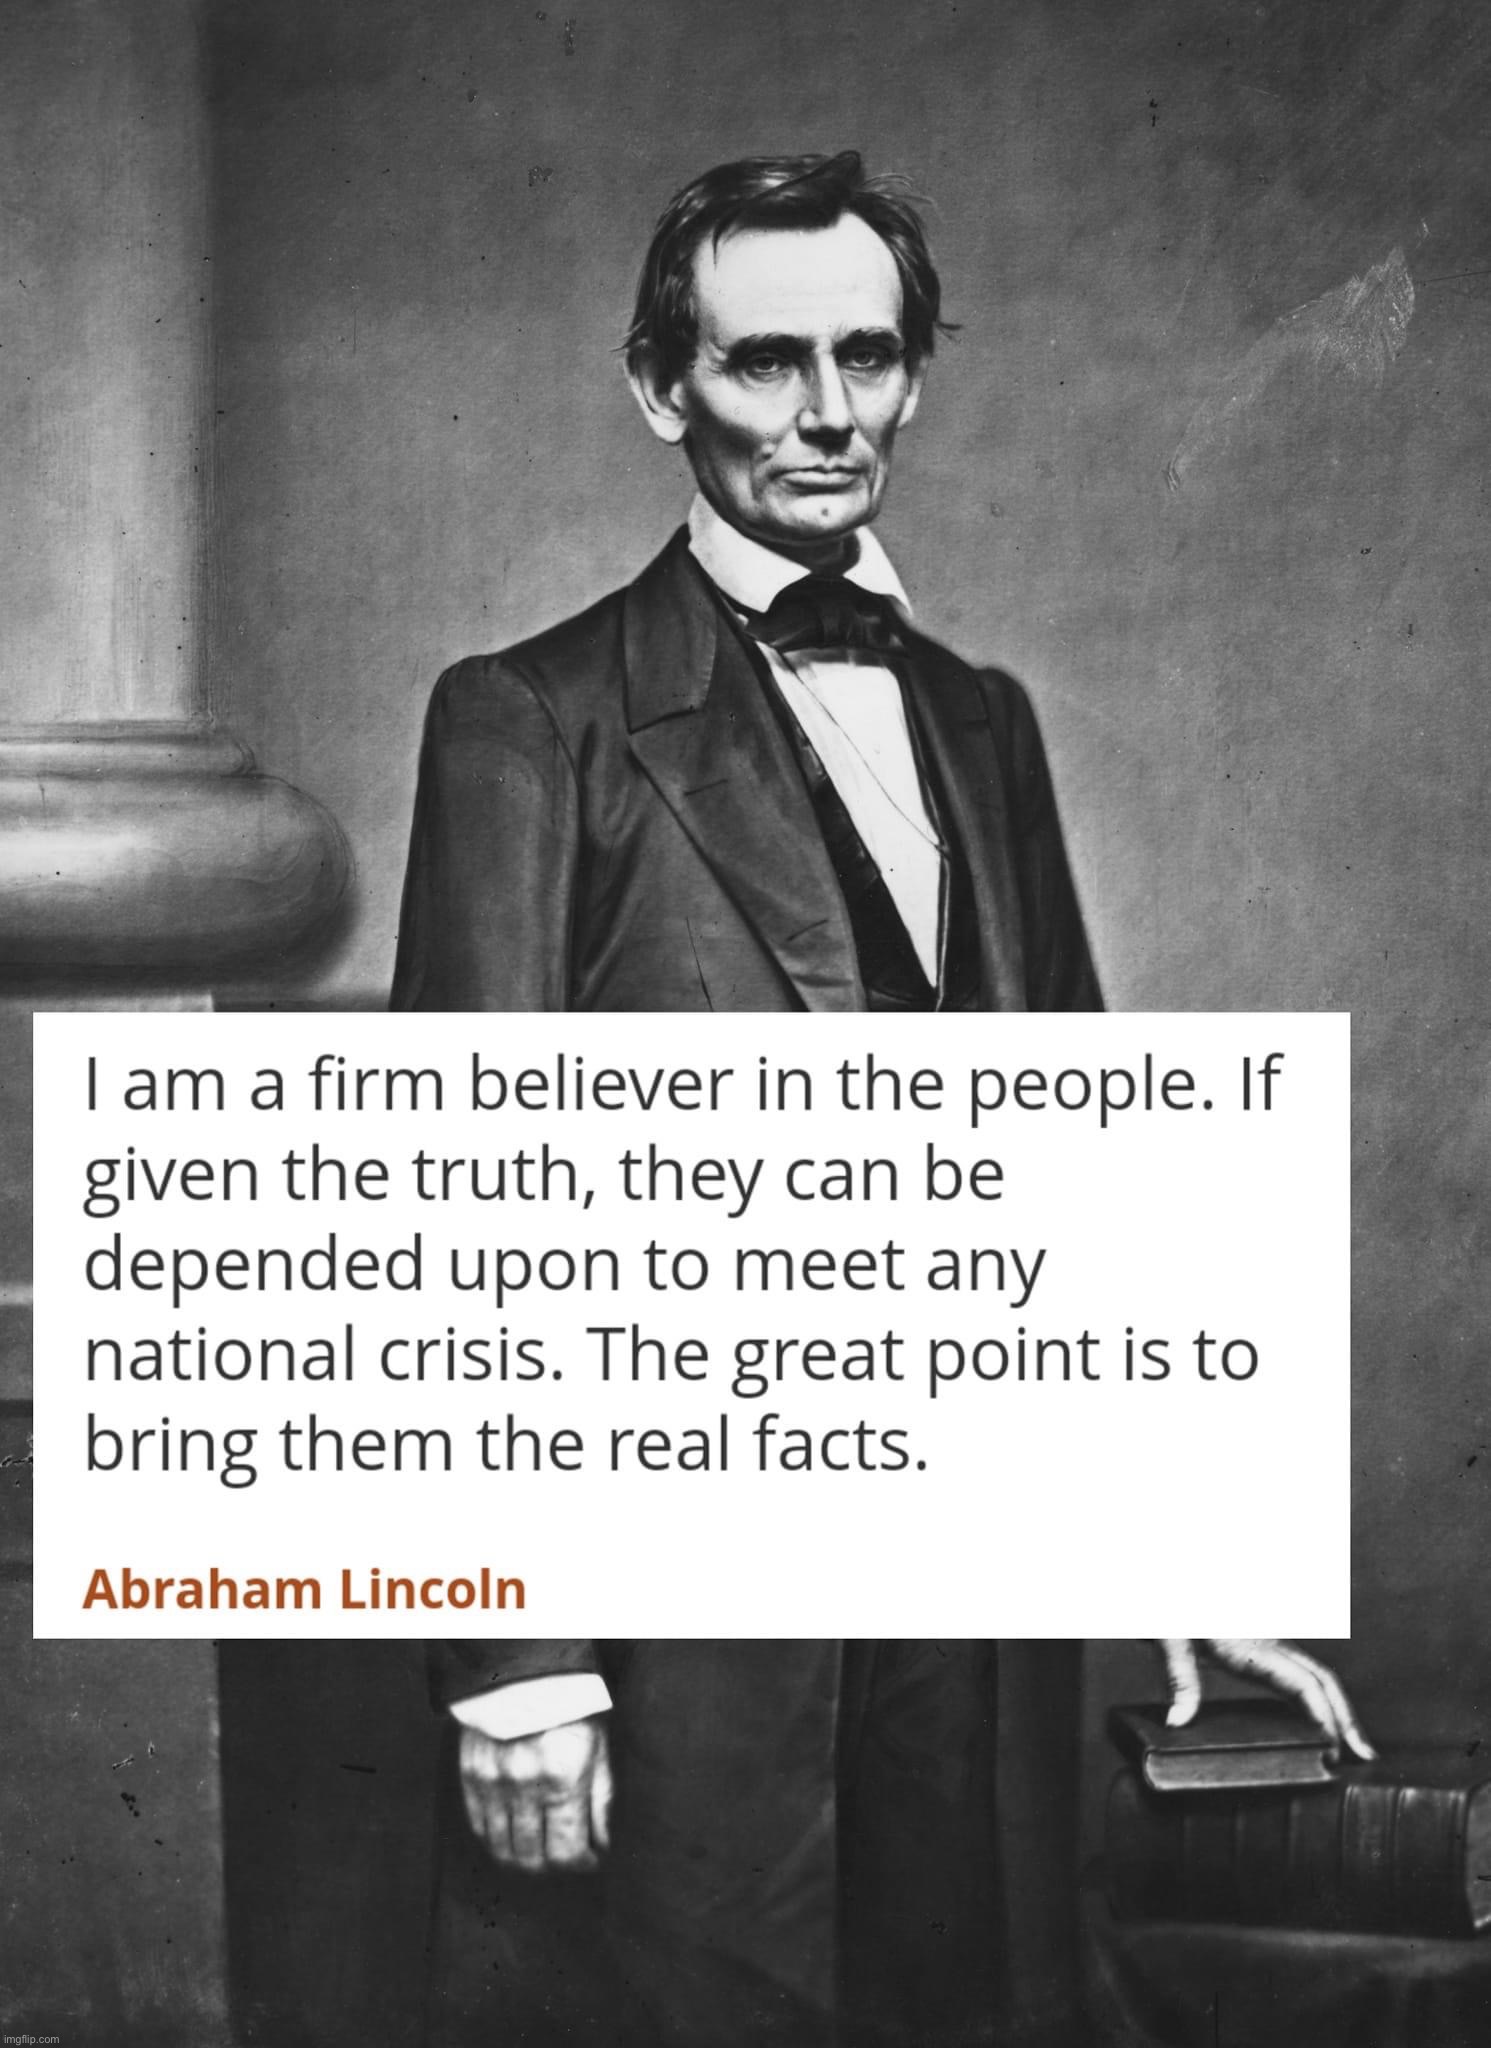 Abraham Lincoln quote fake news | image tagged in abraham lincoln quote fake news | made w/ Imgflip meme maker